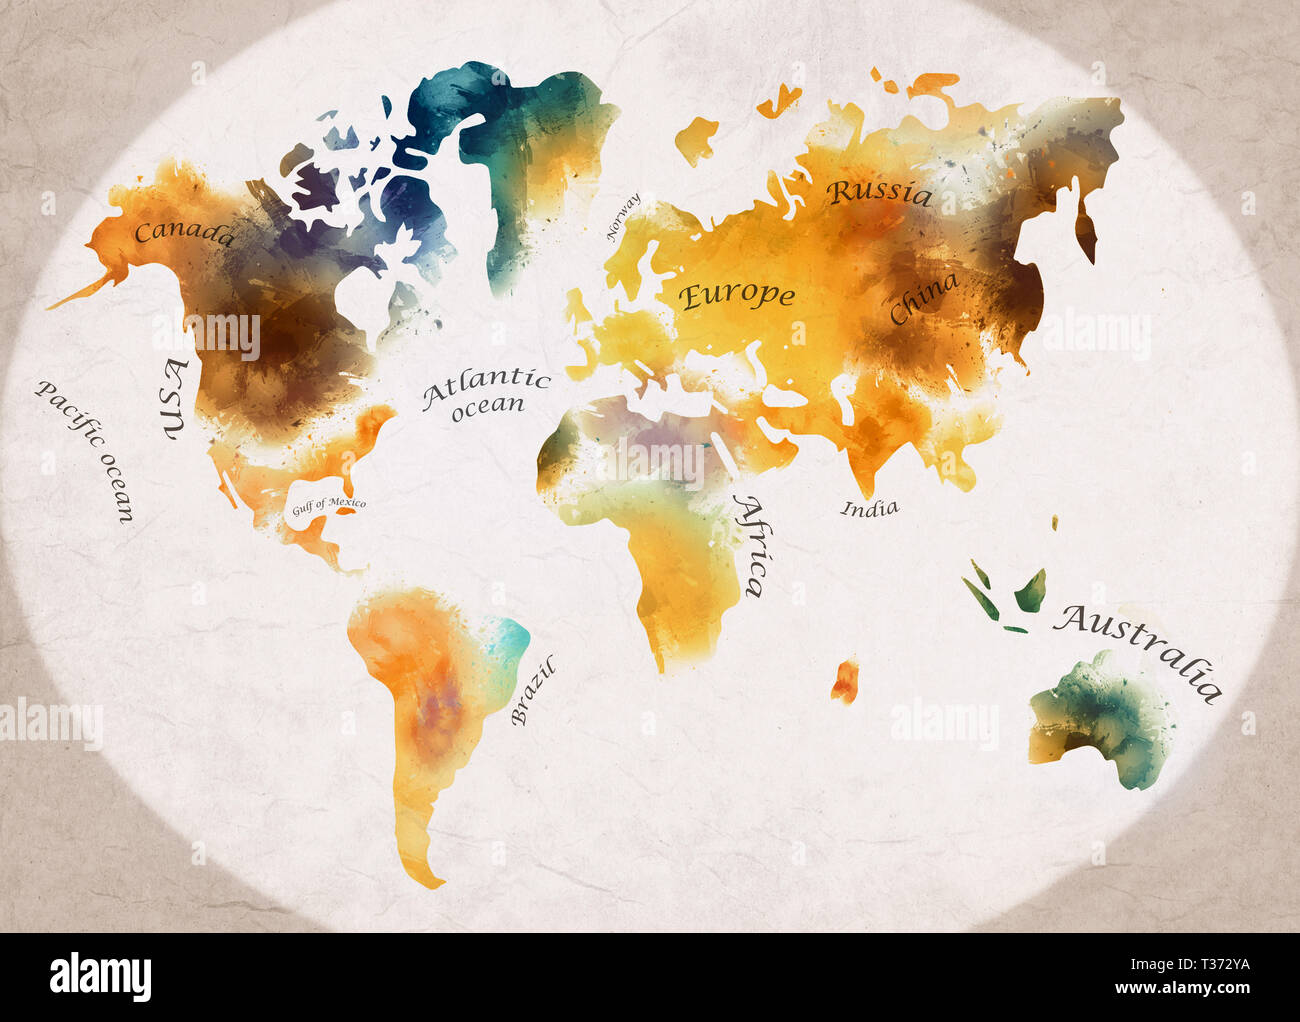 world map colorful watercolor illustration Stock Photo